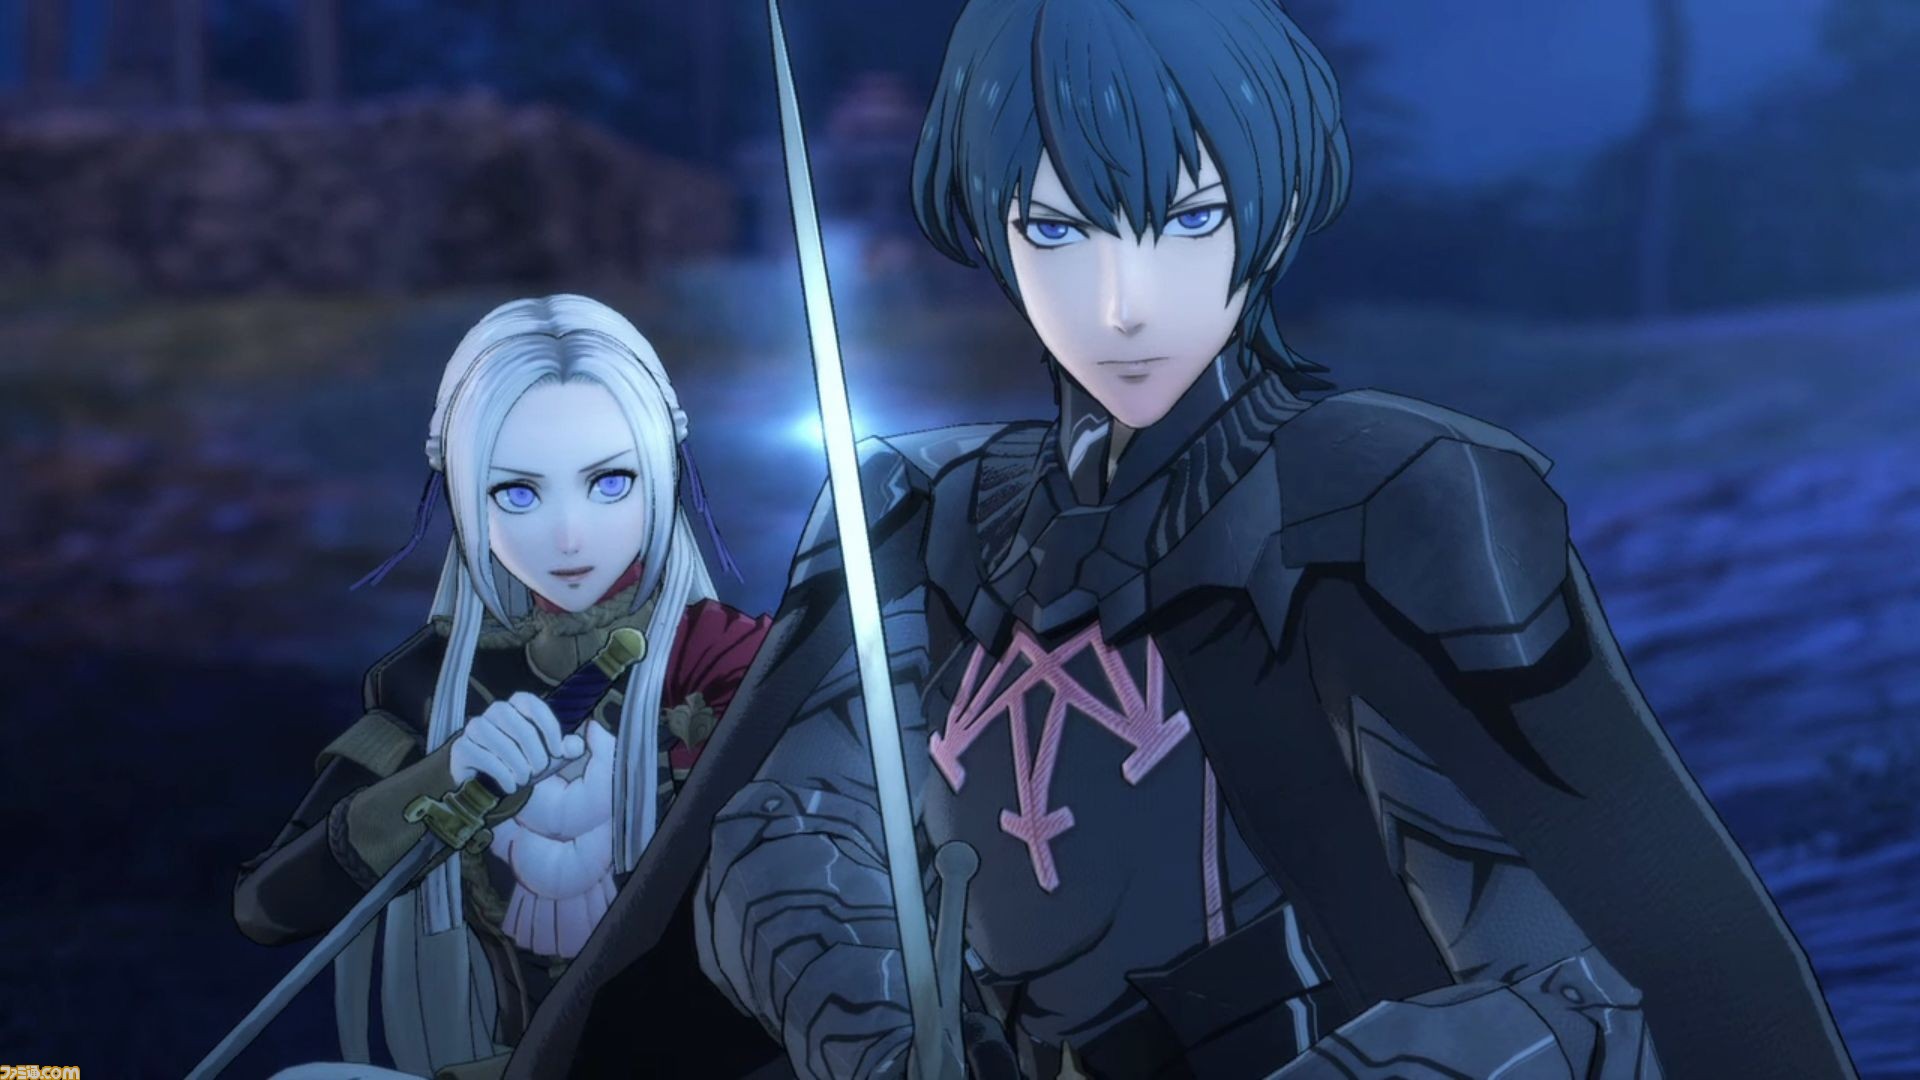 https://www.perfectly-nintendo.com/wp-content/uploads/sites/1/nggallery/fire-emblem-three-houses-25-04-2019-1/1.jpg